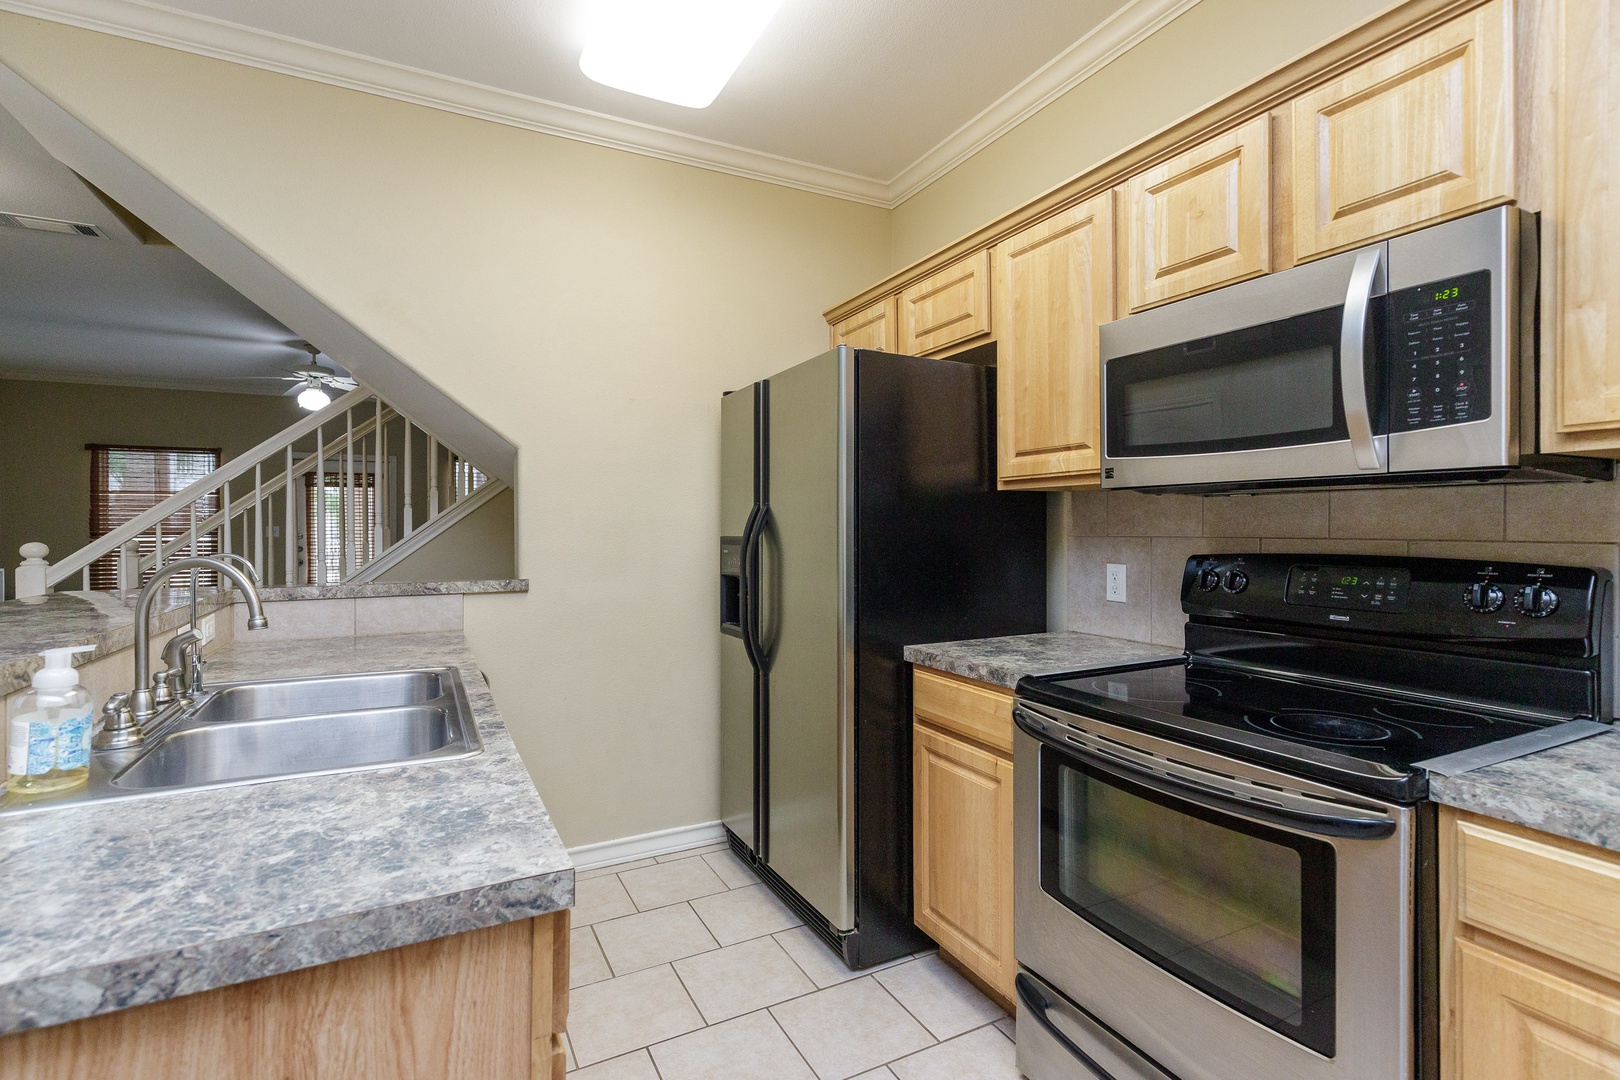 The breezy, open kitchen offers loads of space & all the comforts of home